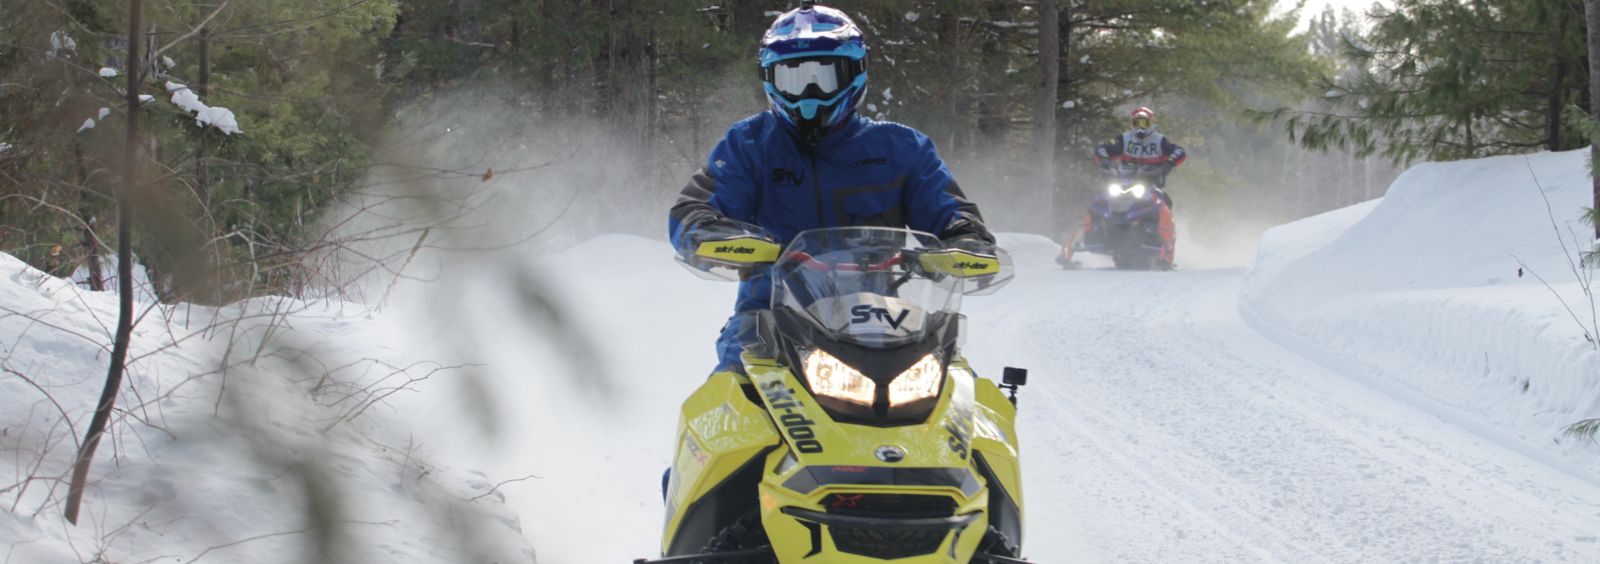 A snowmobiler on an outdoor trail during winter.